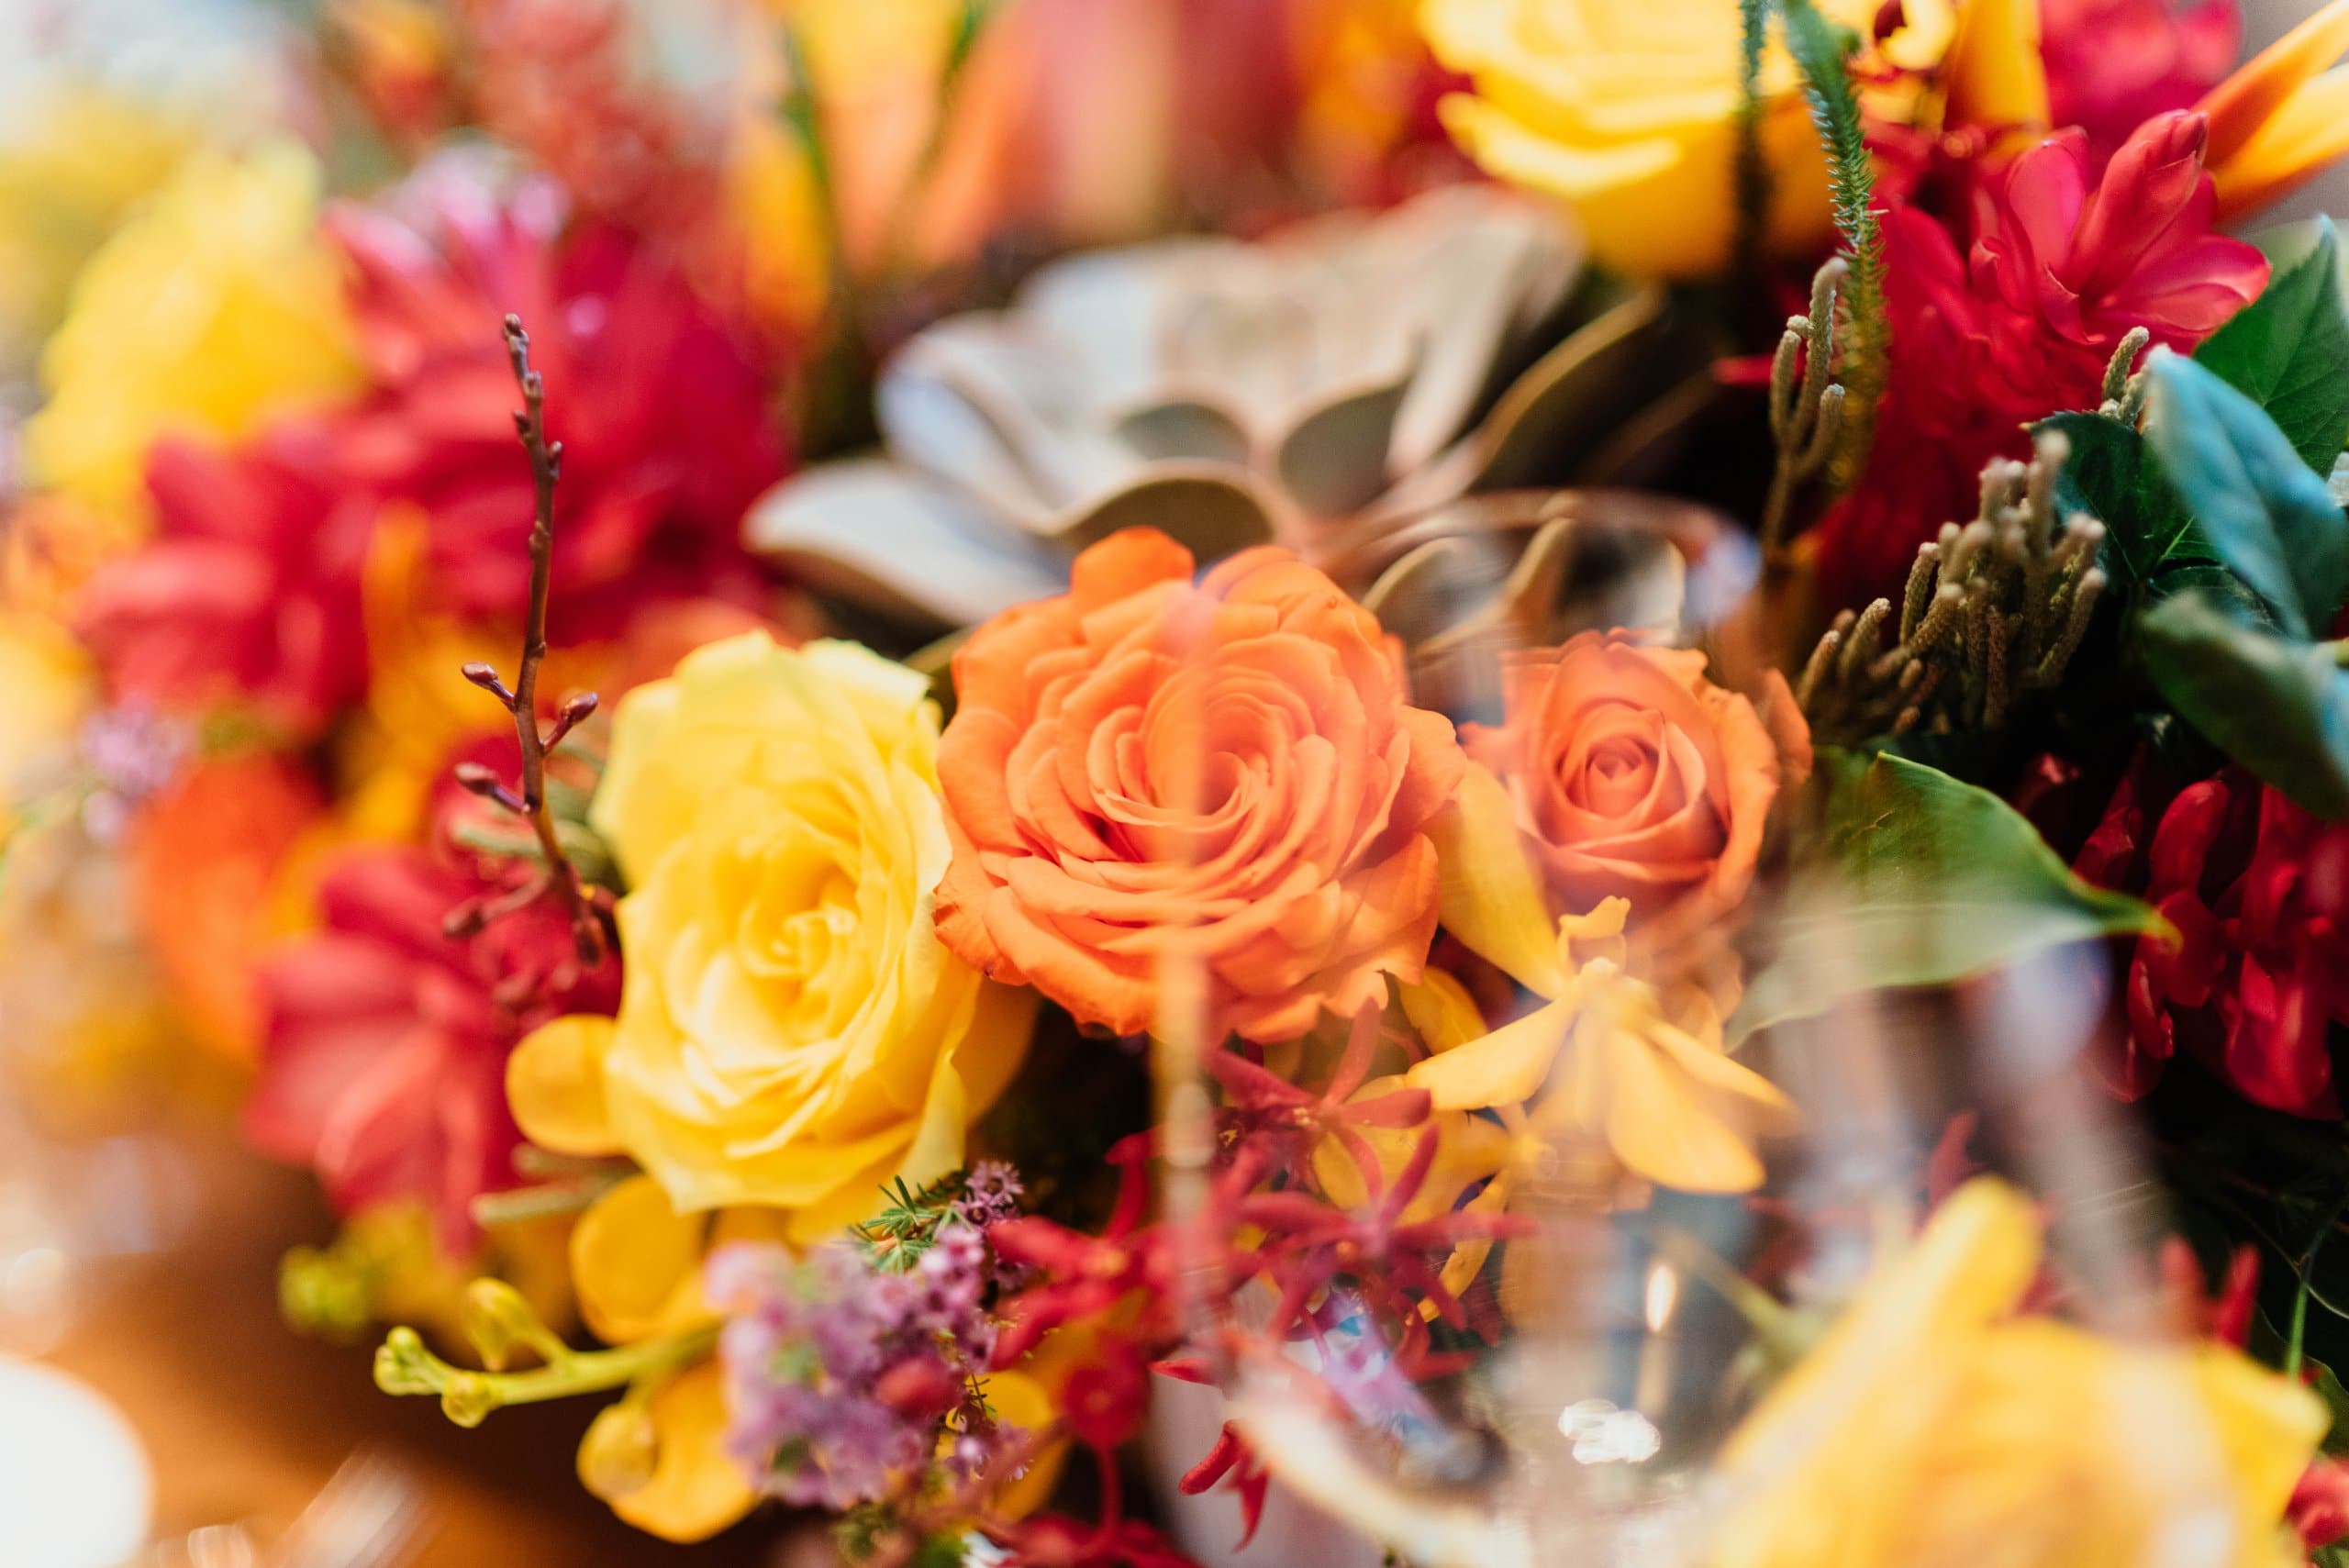 Mixed red, orange and yellow flowers